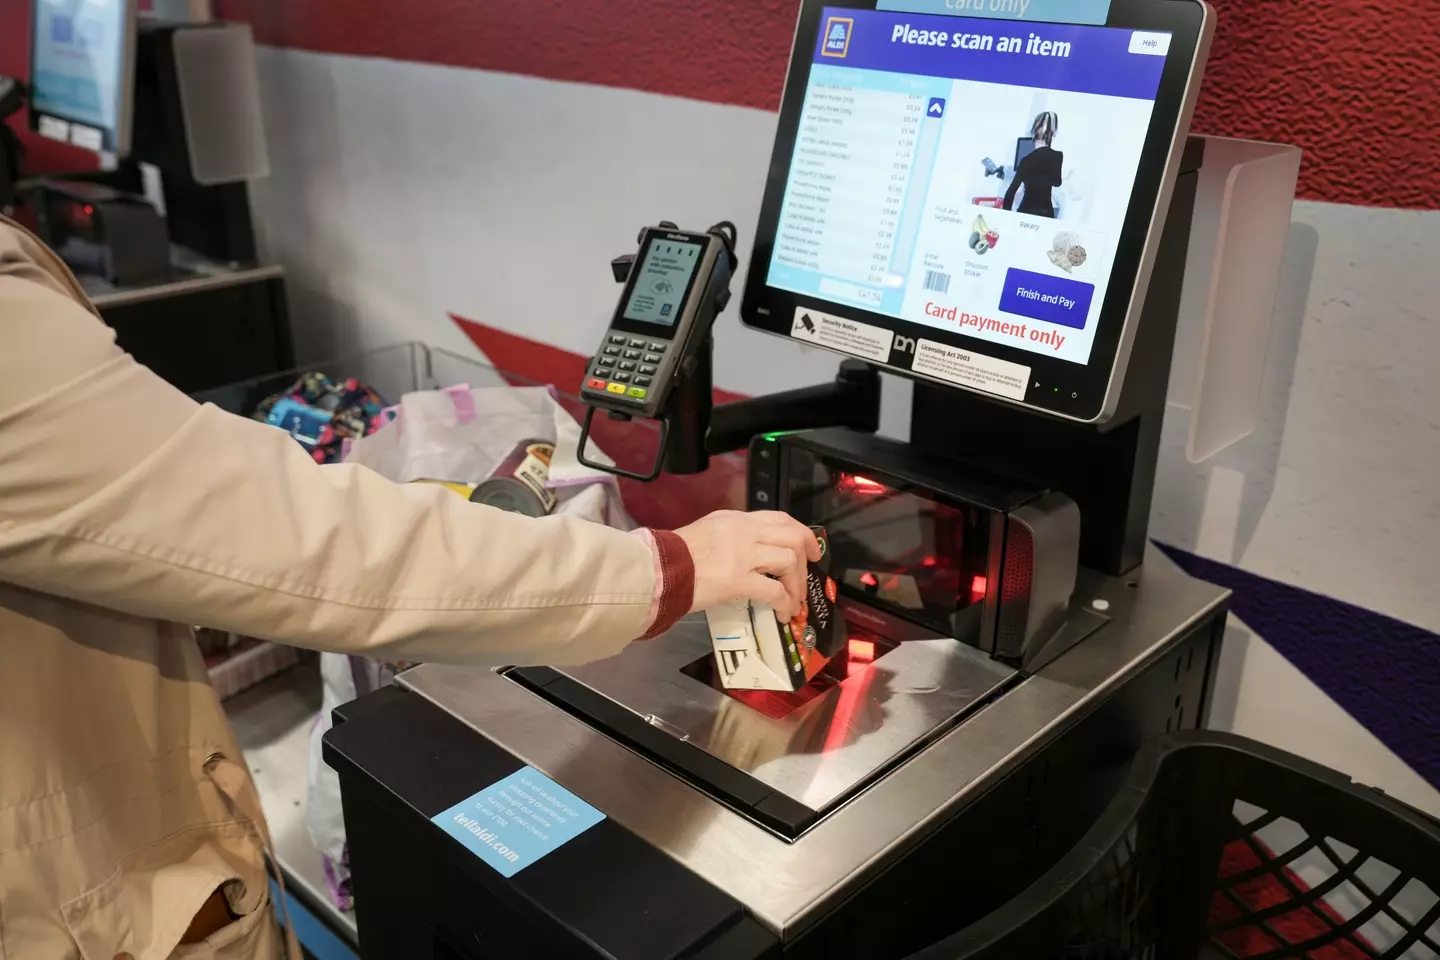 Shoppers reckon there's a big downside to self-checkout tills.